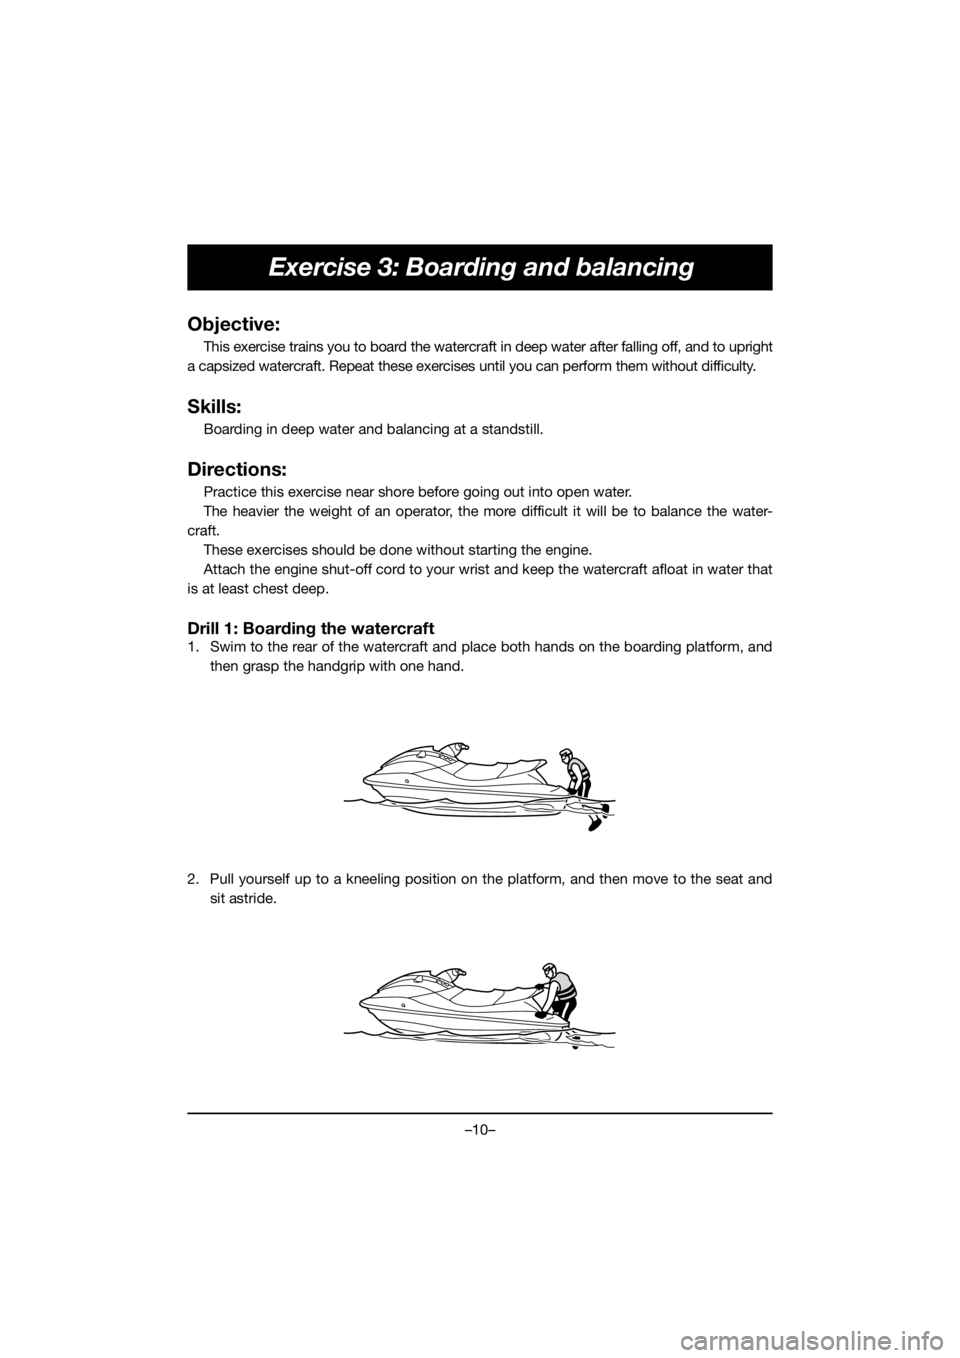 YAMAHA EXR 2020 User Guide –10–
Exercise 3: Boarding and balancing
Objective:
This exercise trains you to board the watercraft in deep water after falling off, and to upright
a capsized watercraft. Repeat these exercises un